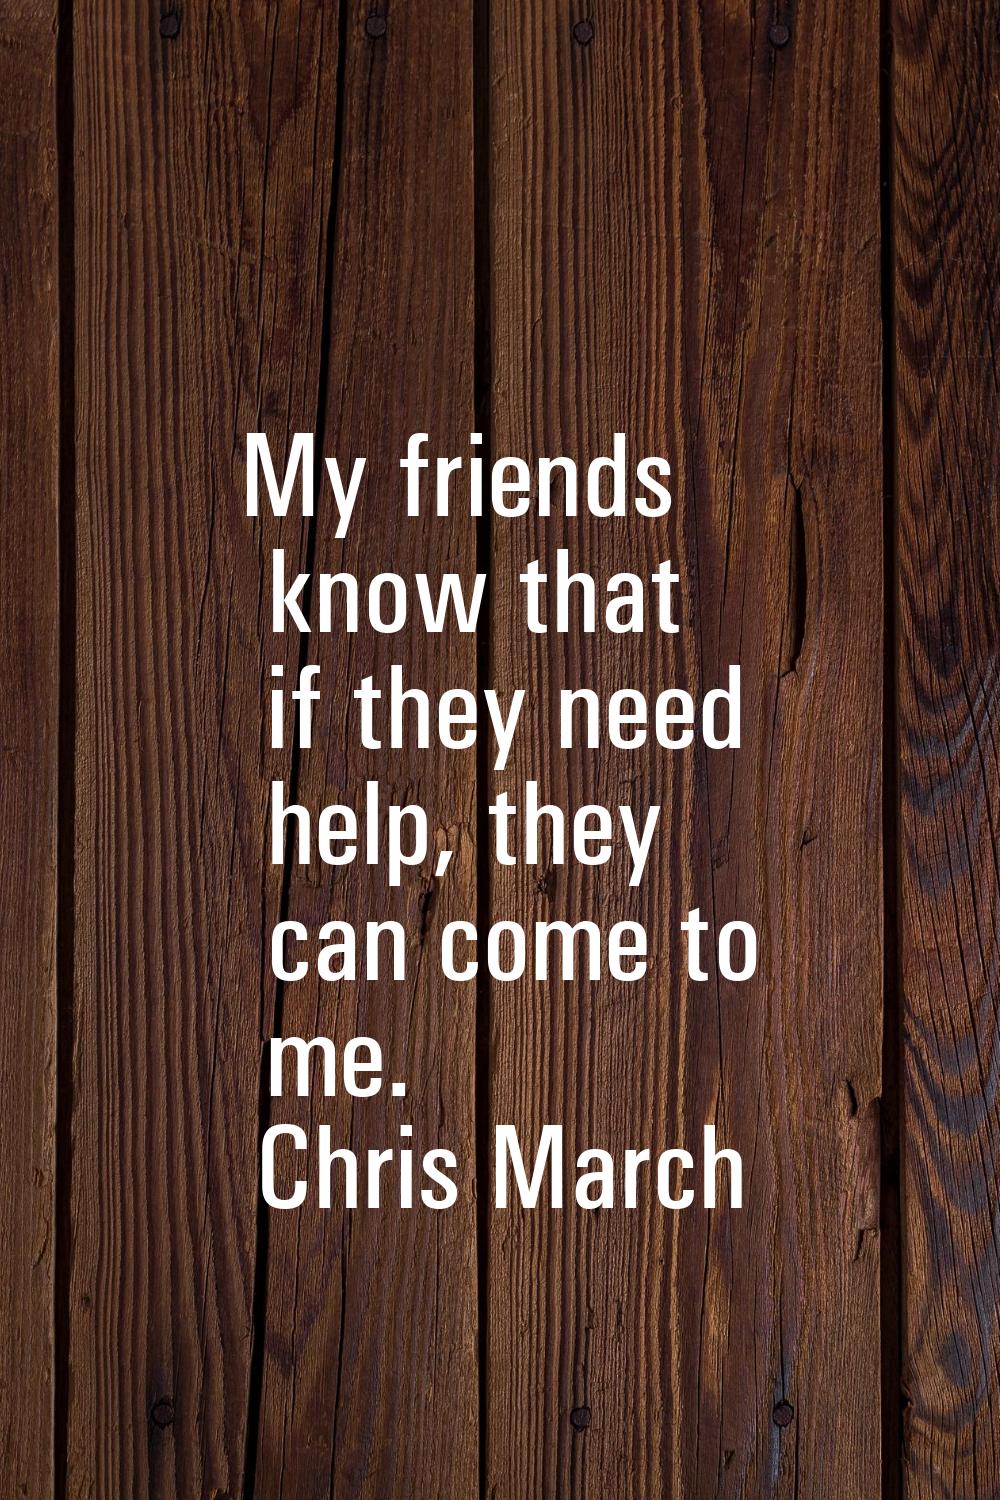 My friends know that if they need help, they can come to me.